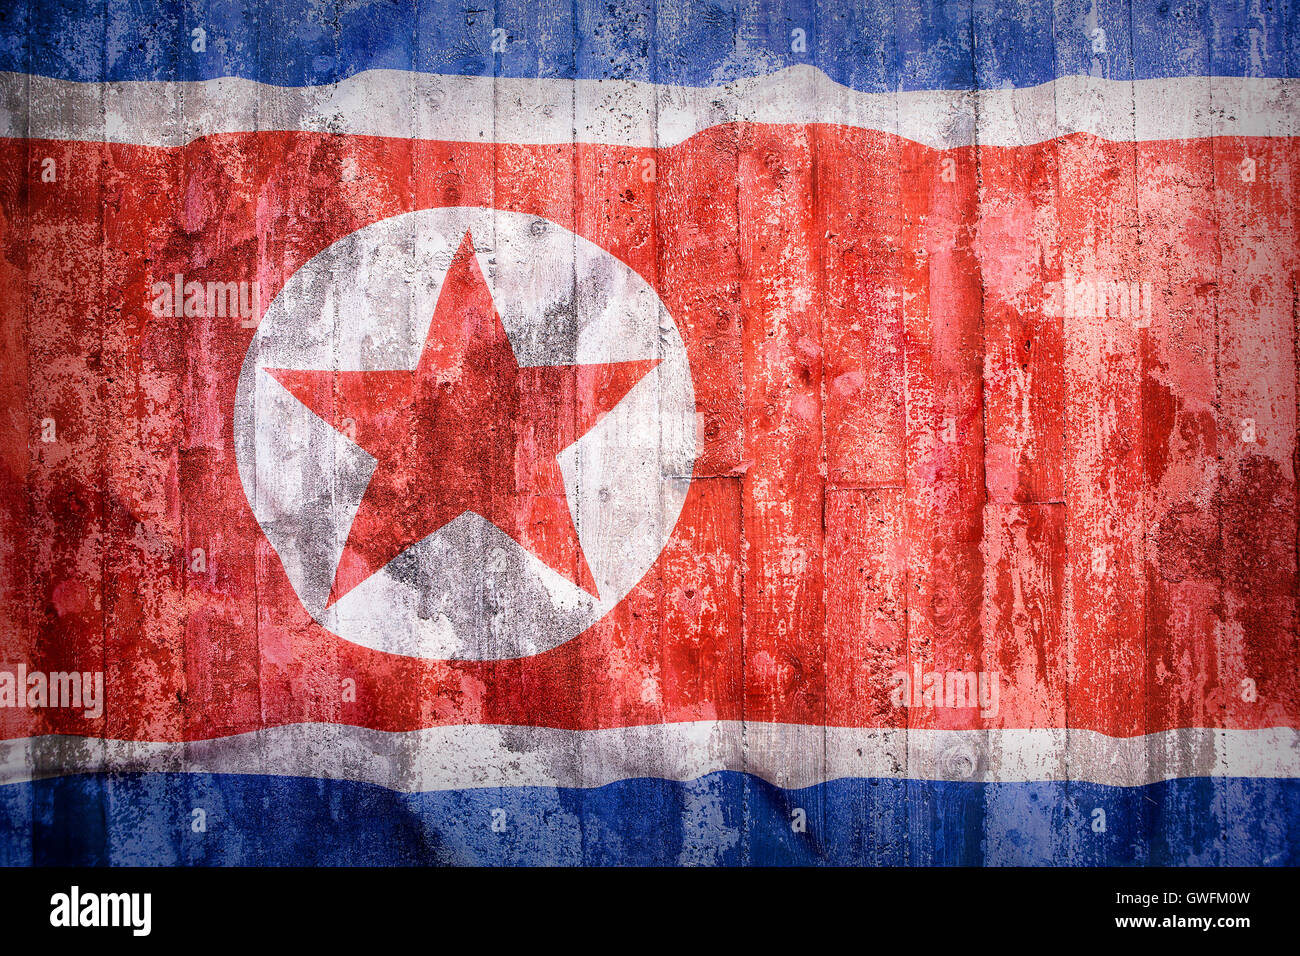 Grunge style of North Korea flag on a brick wall for background Stock Photo